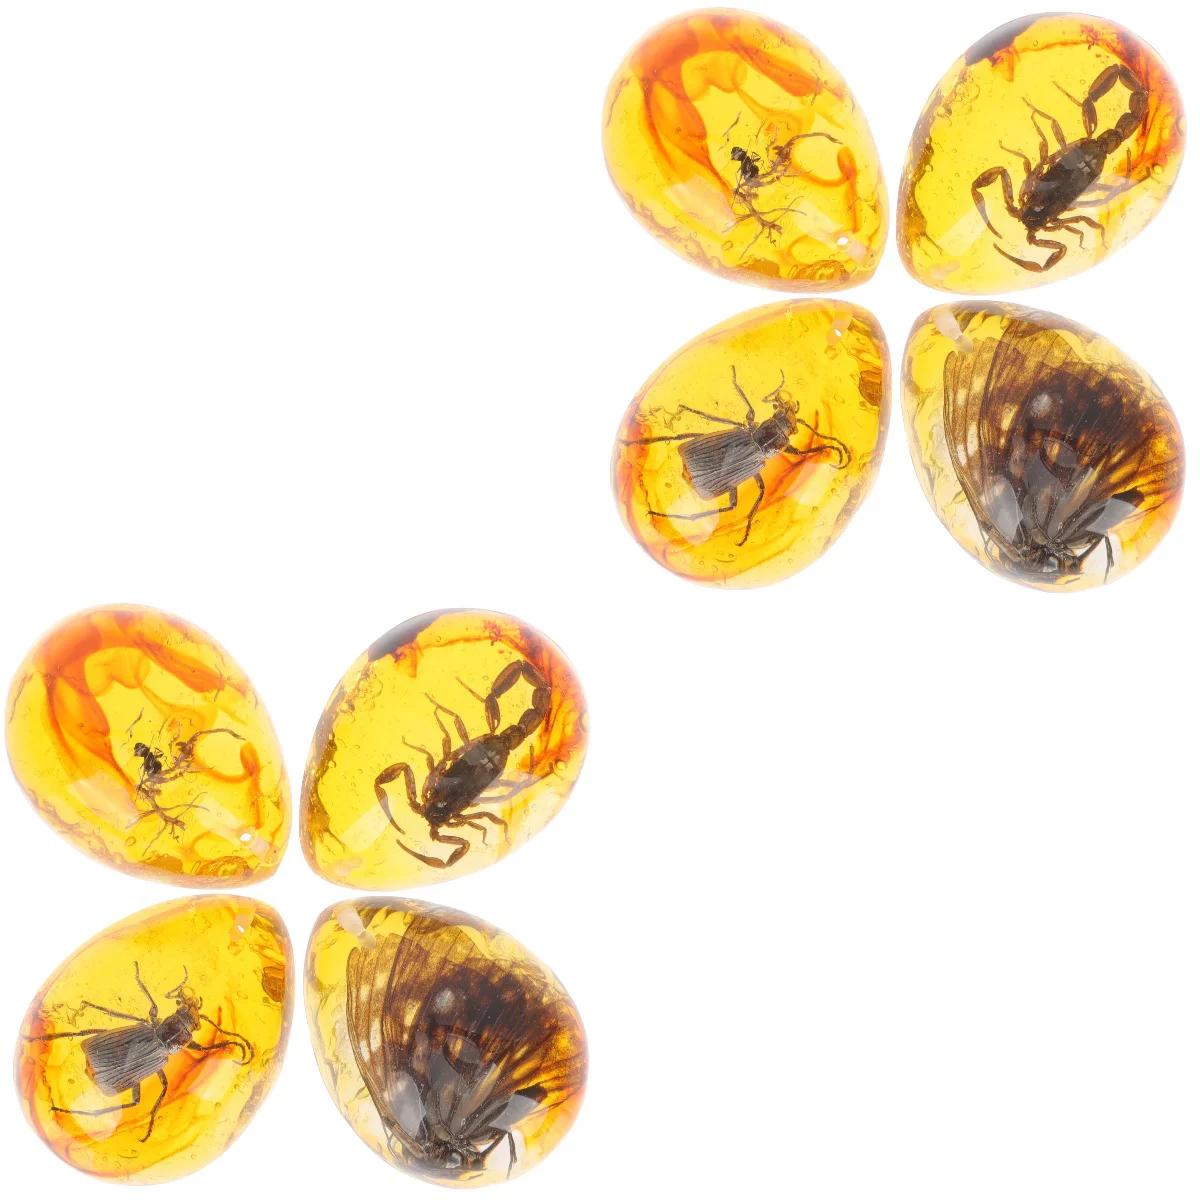 

8 Pcs Necklace Pendant Insect Amber Specimen Resin Decorative Bug Manual Pendants DIY Insects